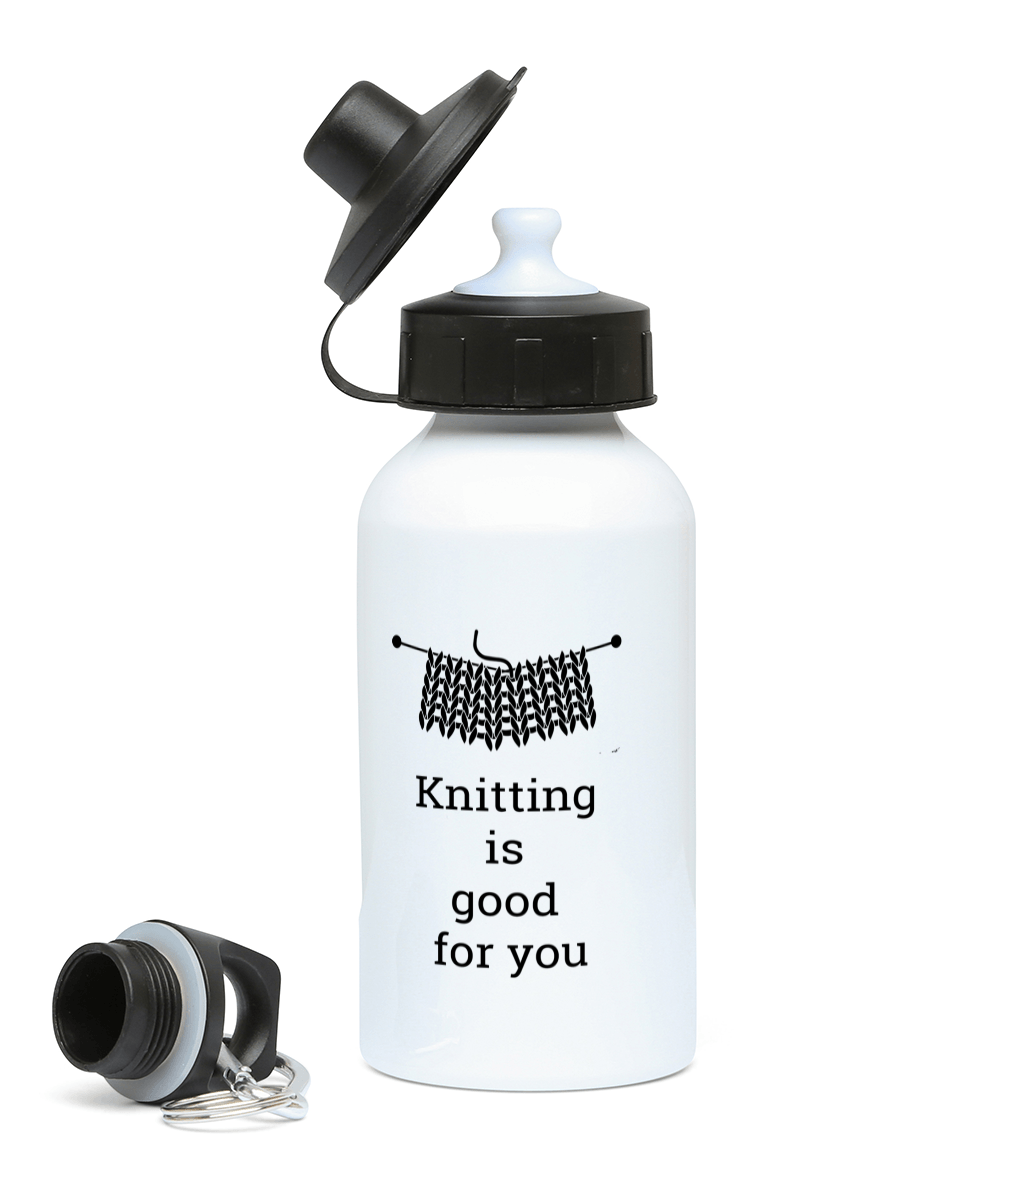 water bottle 400ml knitting is good for you with knitting image